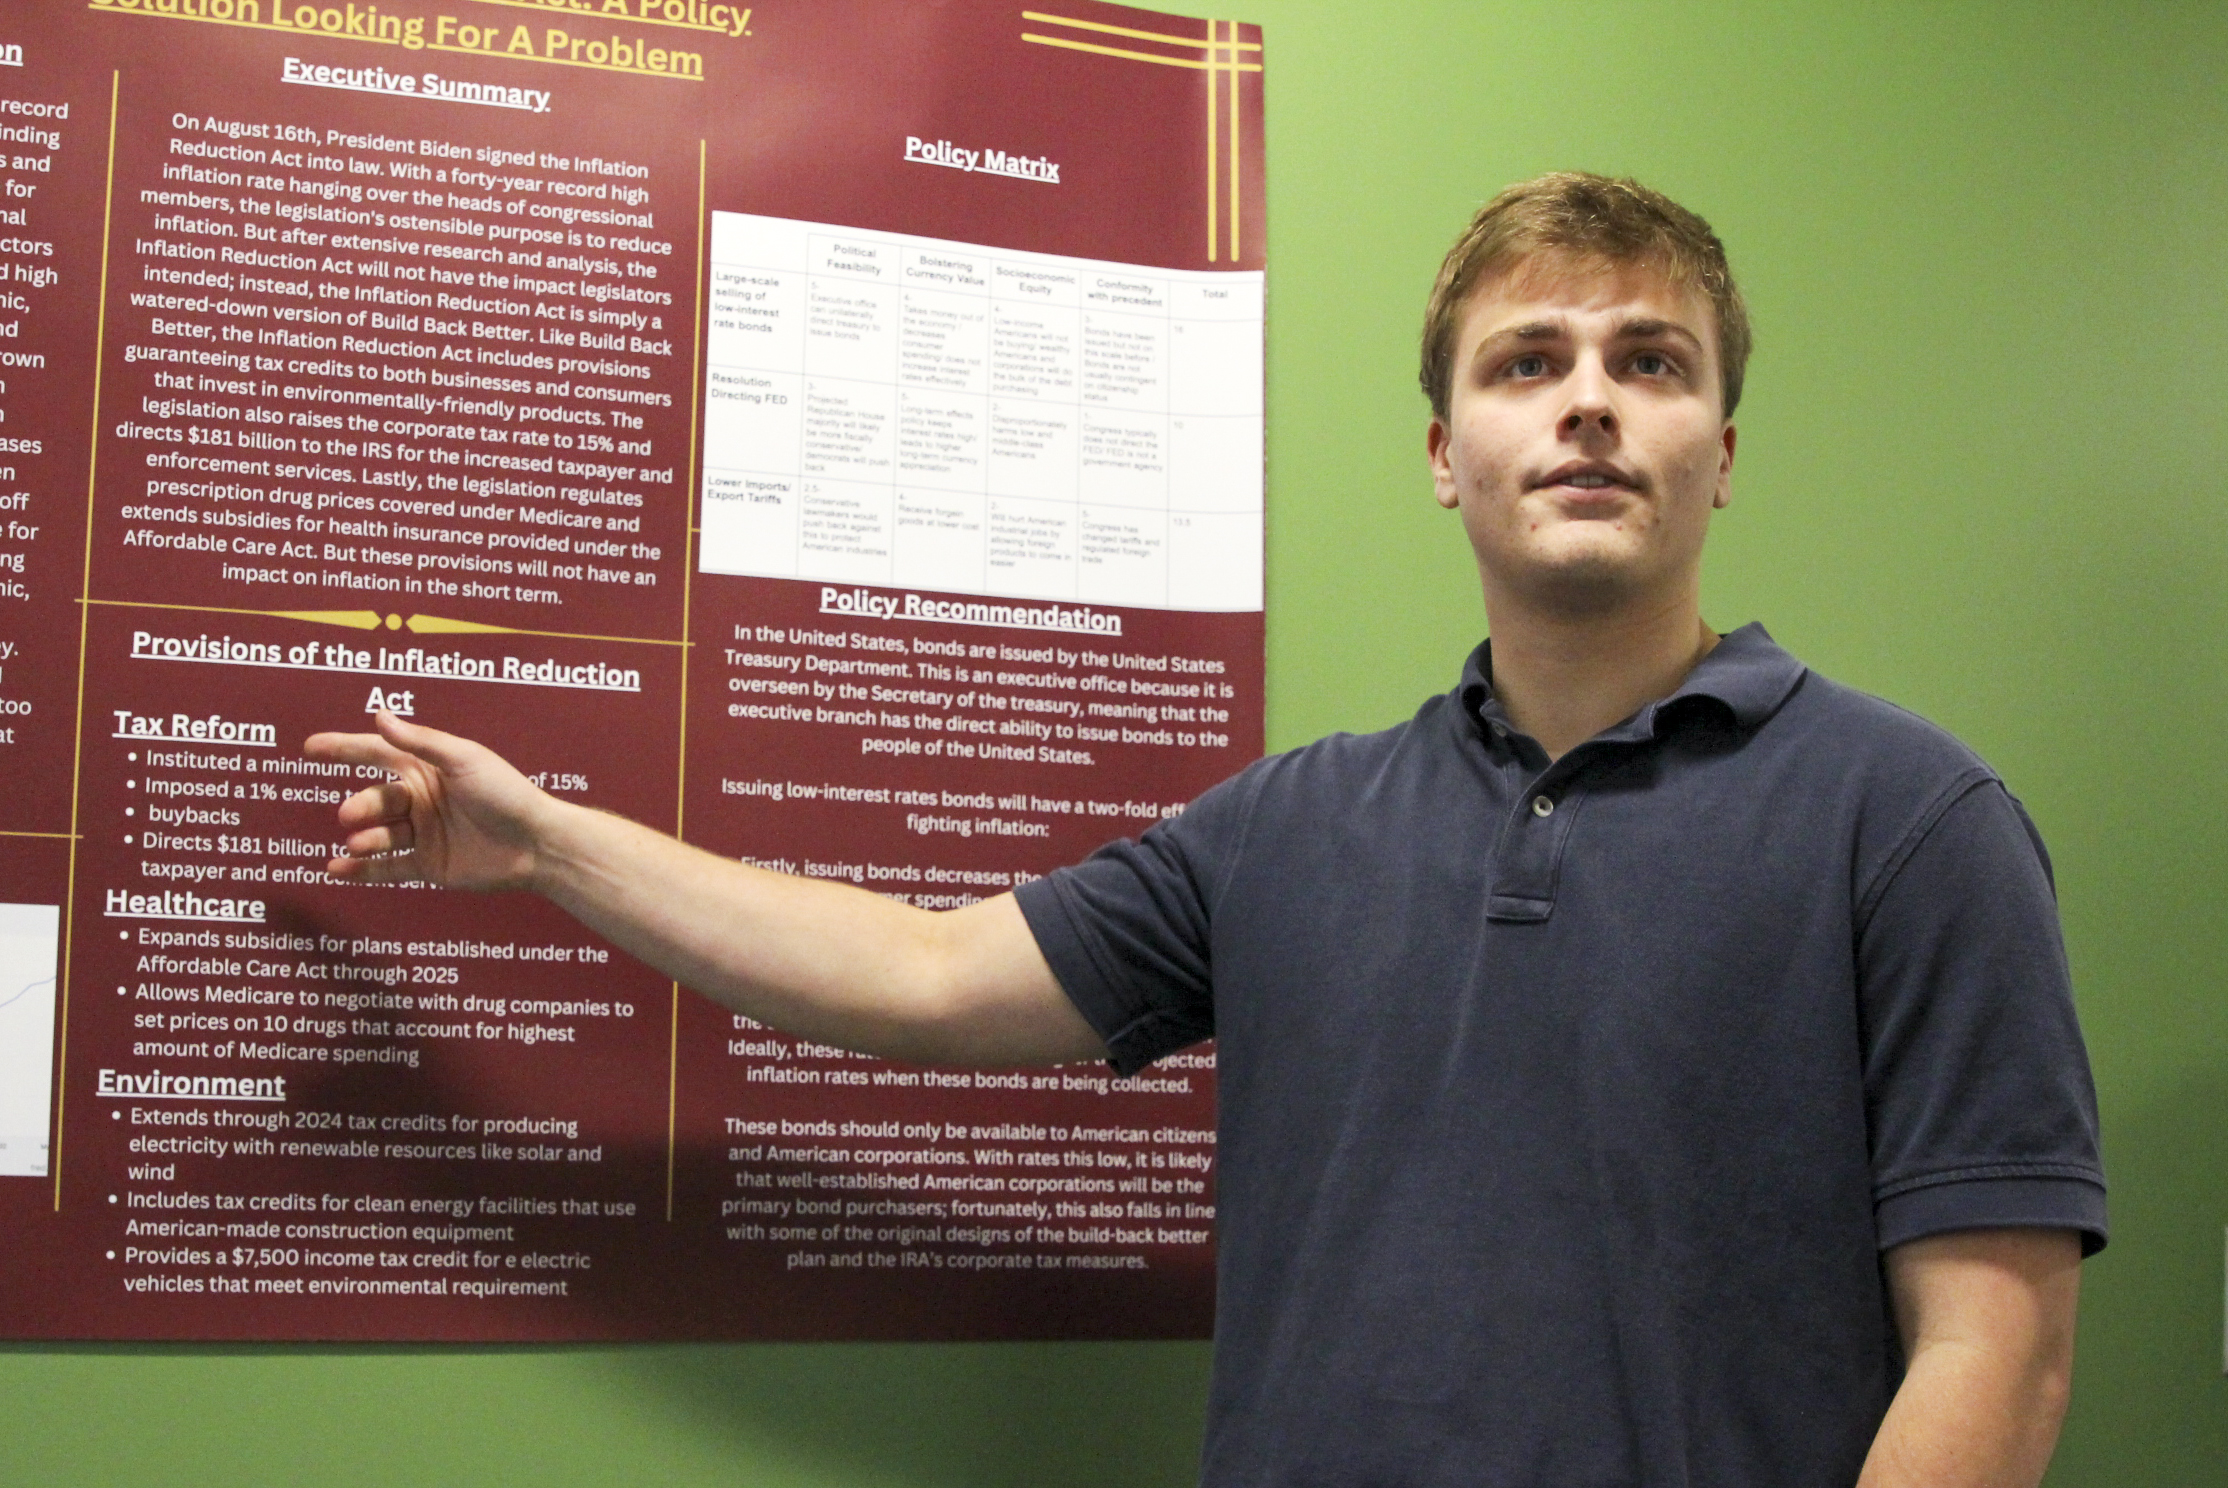 Curran Gilster gestures to a research poster